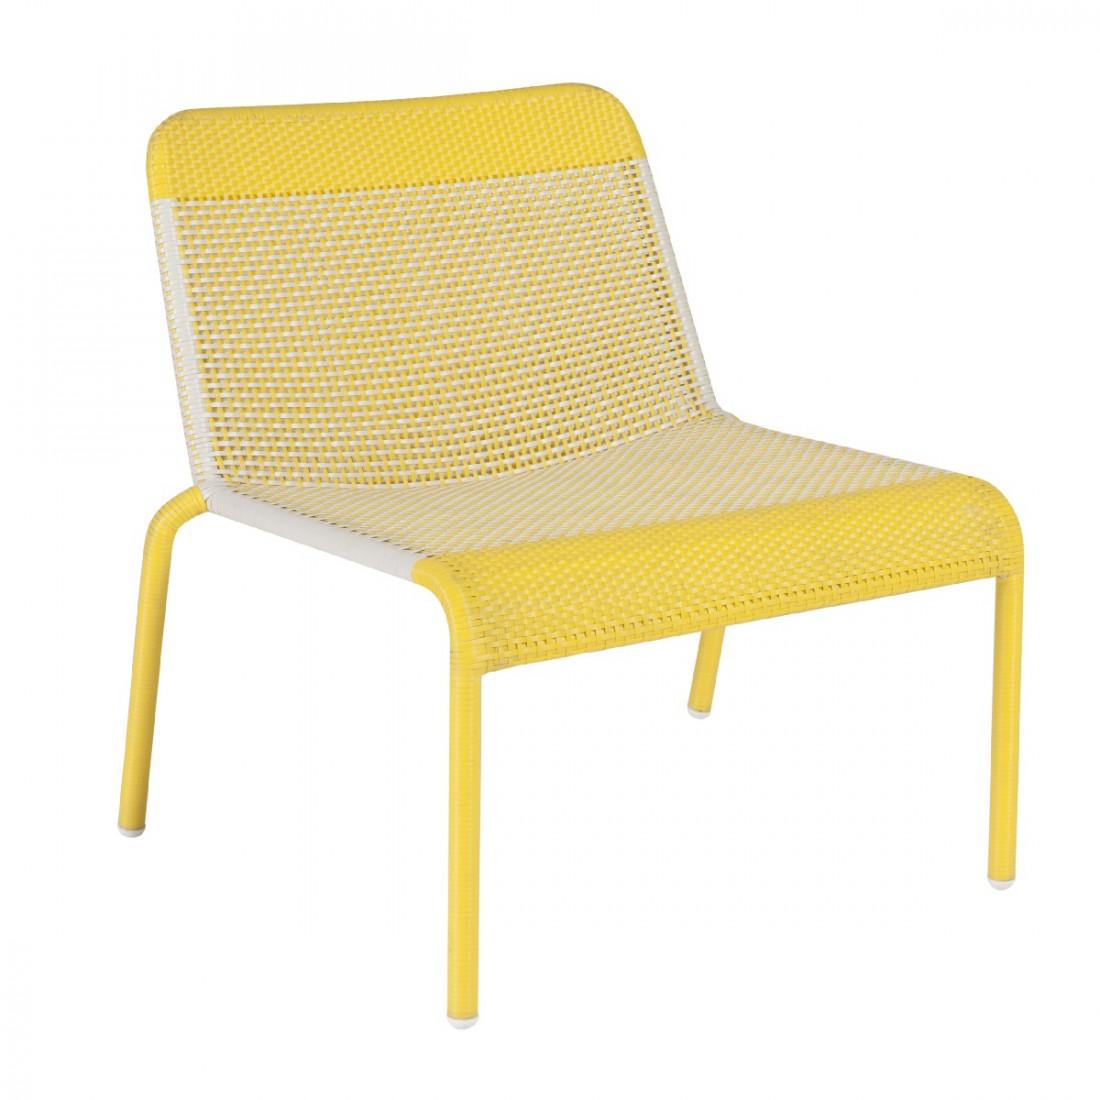 Yellow braided resin lounge armchair indoor or outdoor. They will be perfect on your terrace, in your veranda, your winter garden, even around the swimming pool! French design and Retro style, practical (stackable!) Never used.